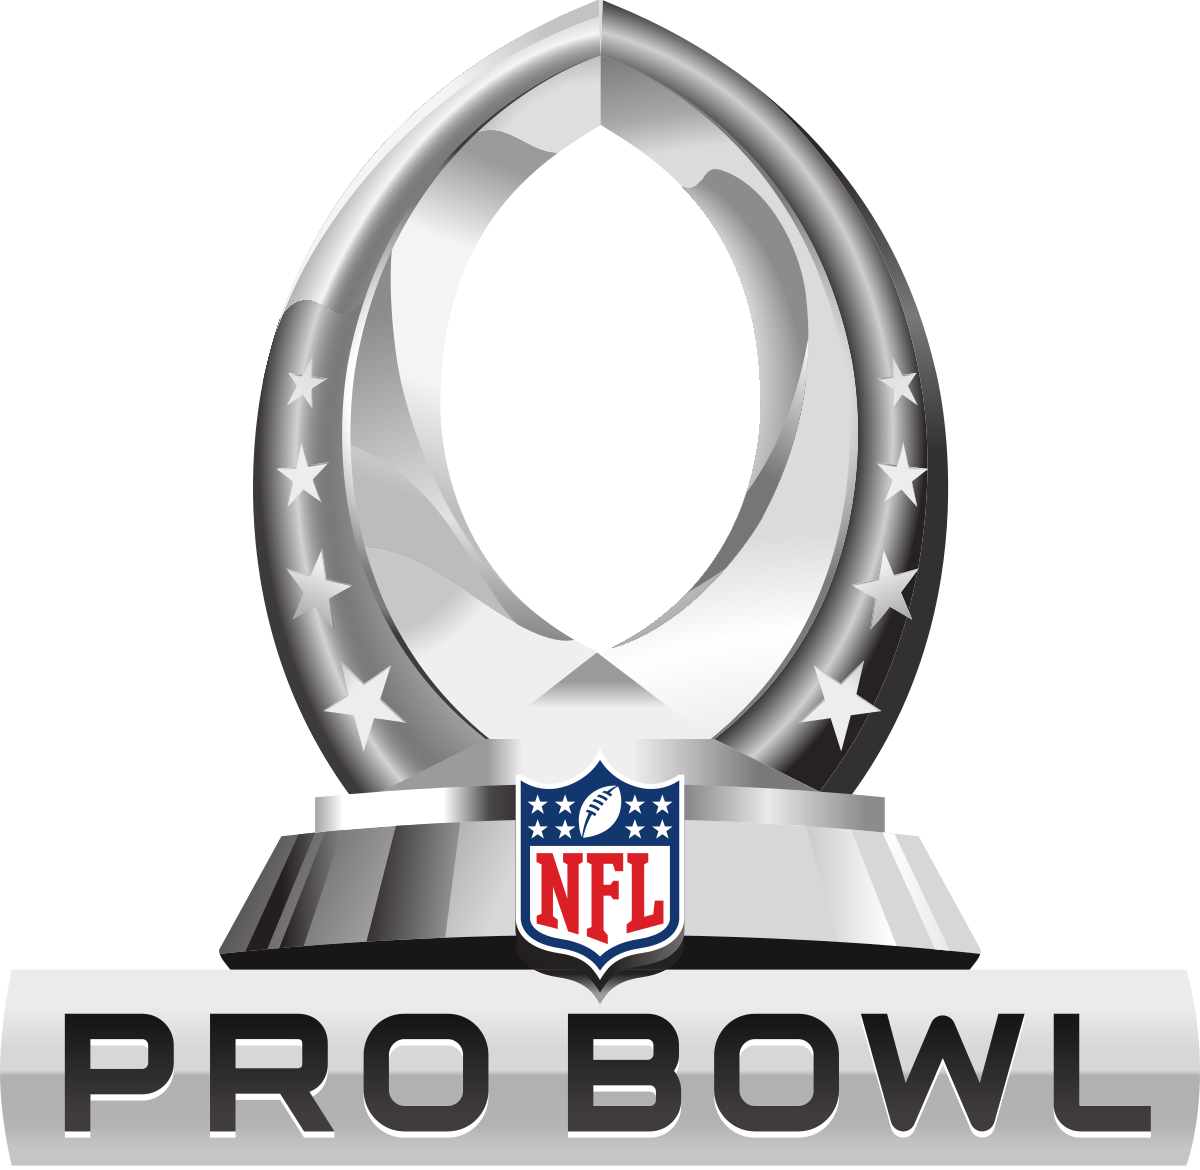 Top 10 Questionable Pro Bowl Selections